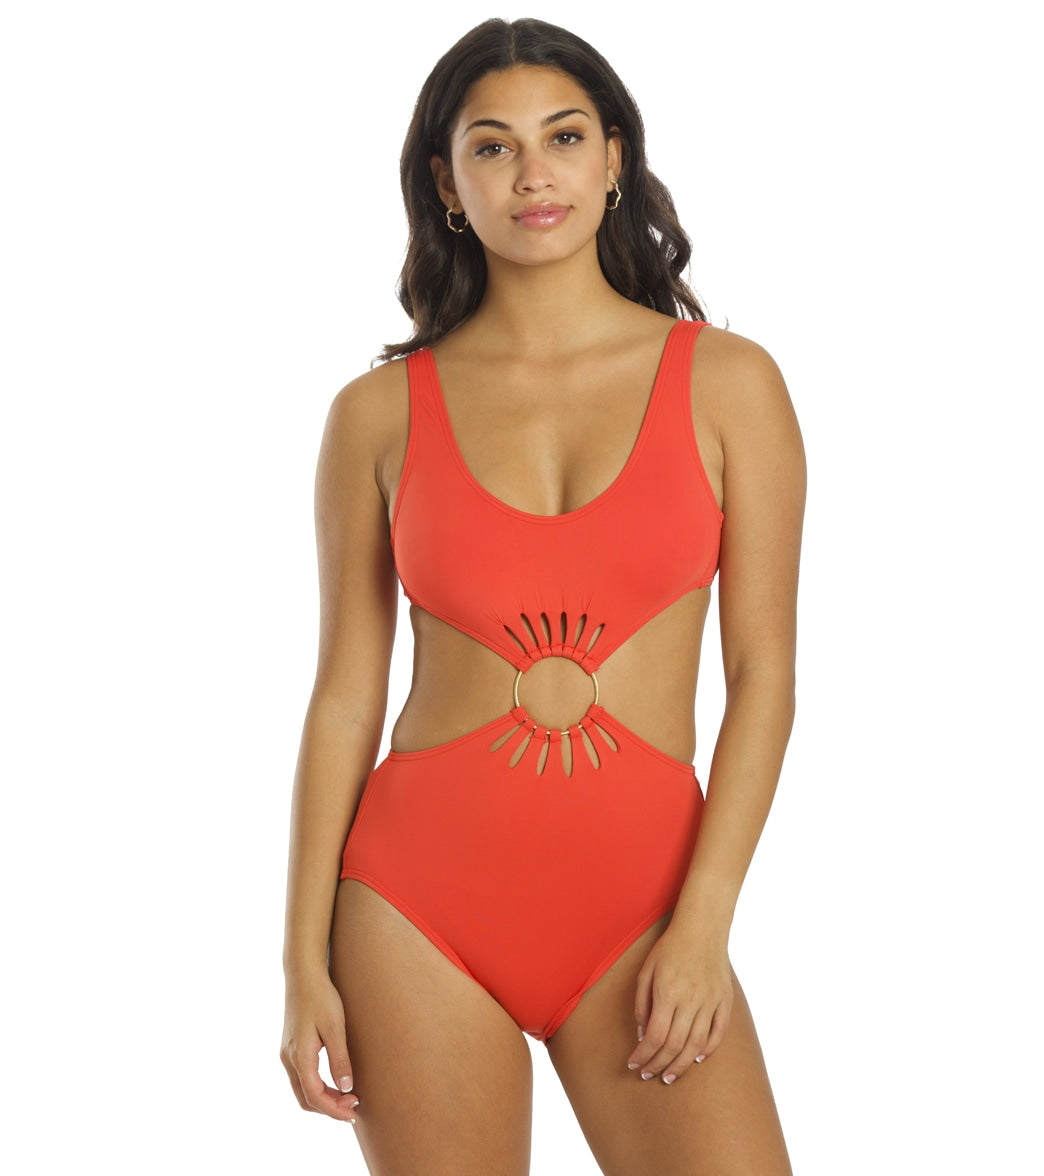 Vince Camuto Womens Serengeti Shades Logo Ring Cut Out Scoopneck One Piece Swimsuit